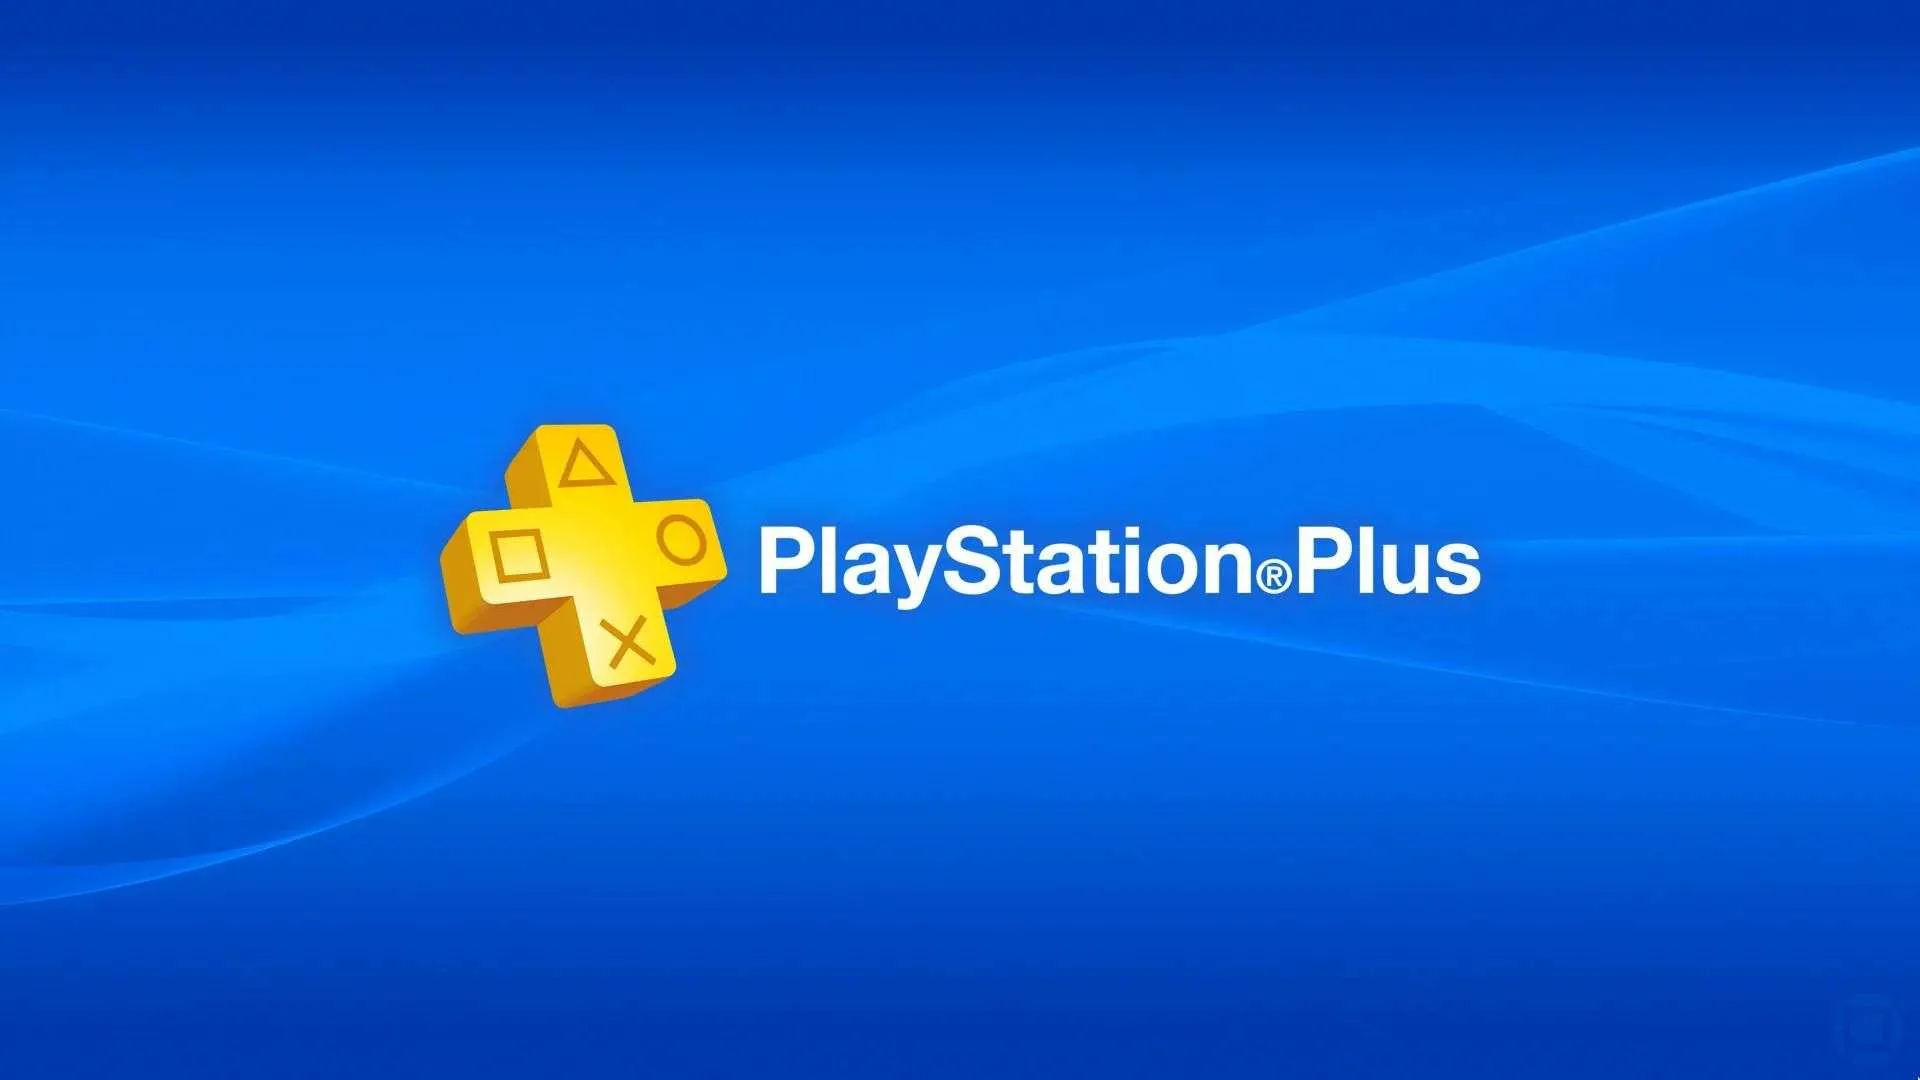 PlayStation Plus loses 2 million subscribers